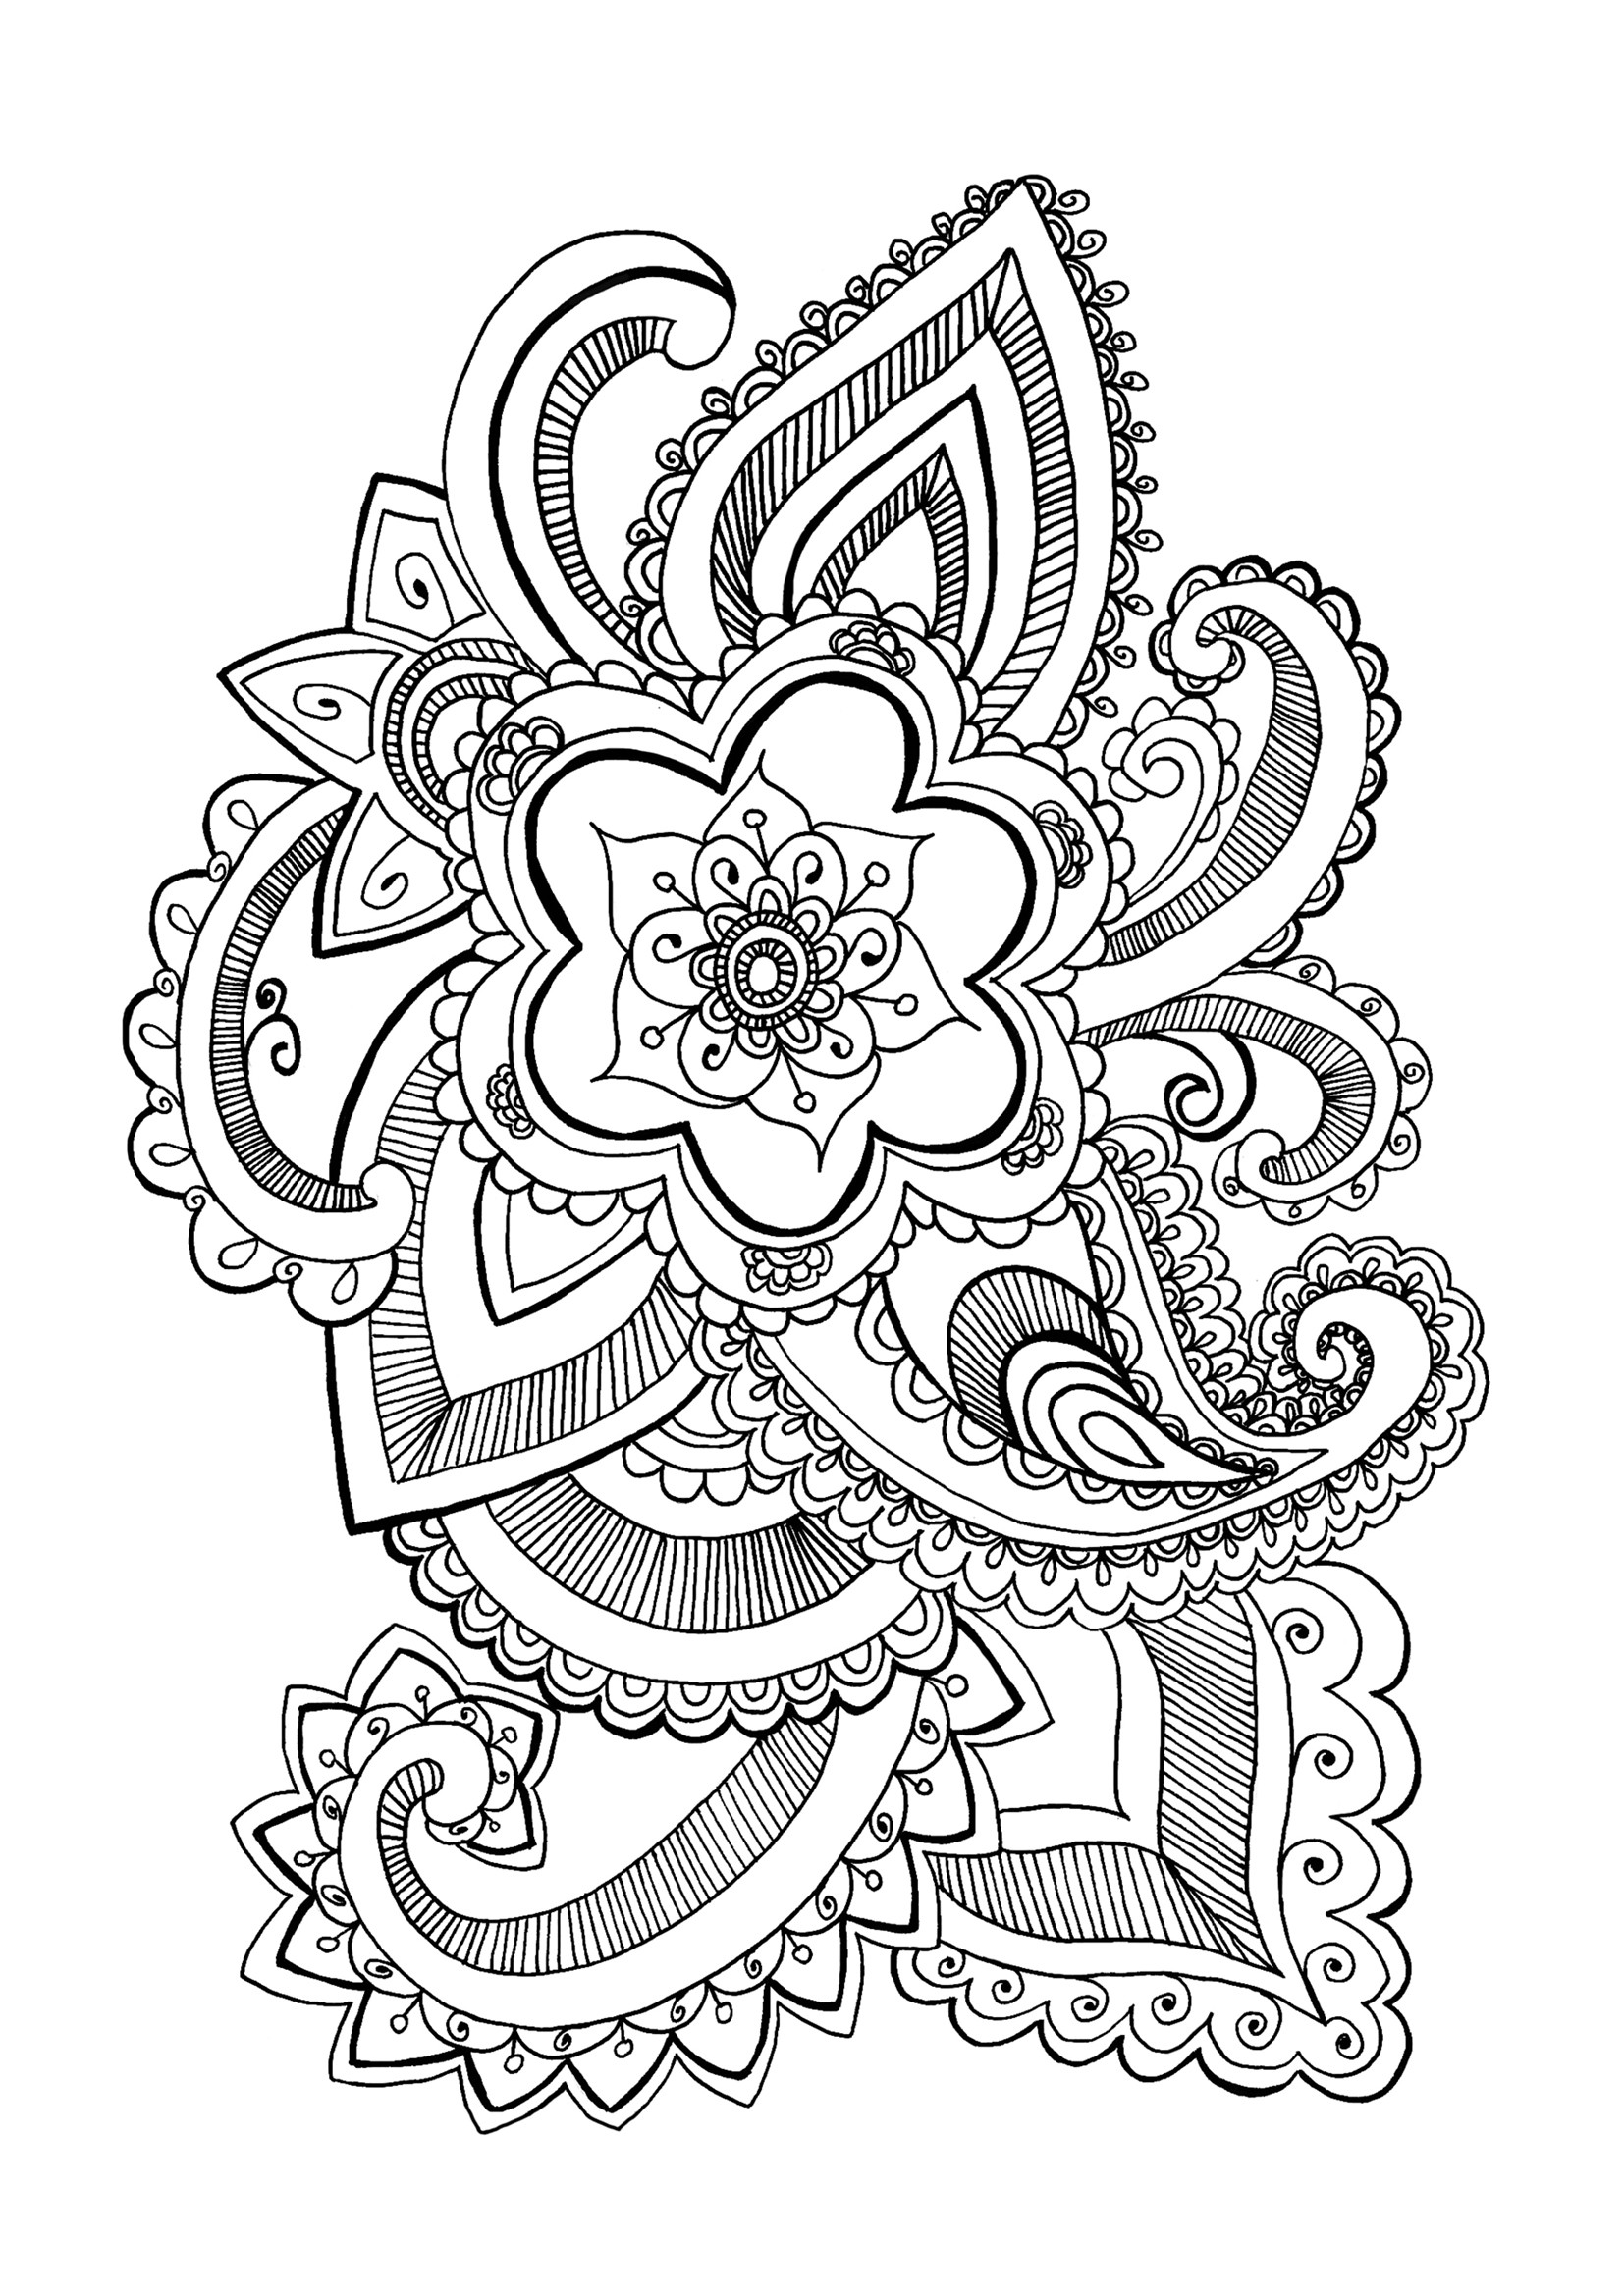 Flowers Coloring Pages For Adults
 Flower Mandala Coloring Pages Best Coloring Pages For Kids